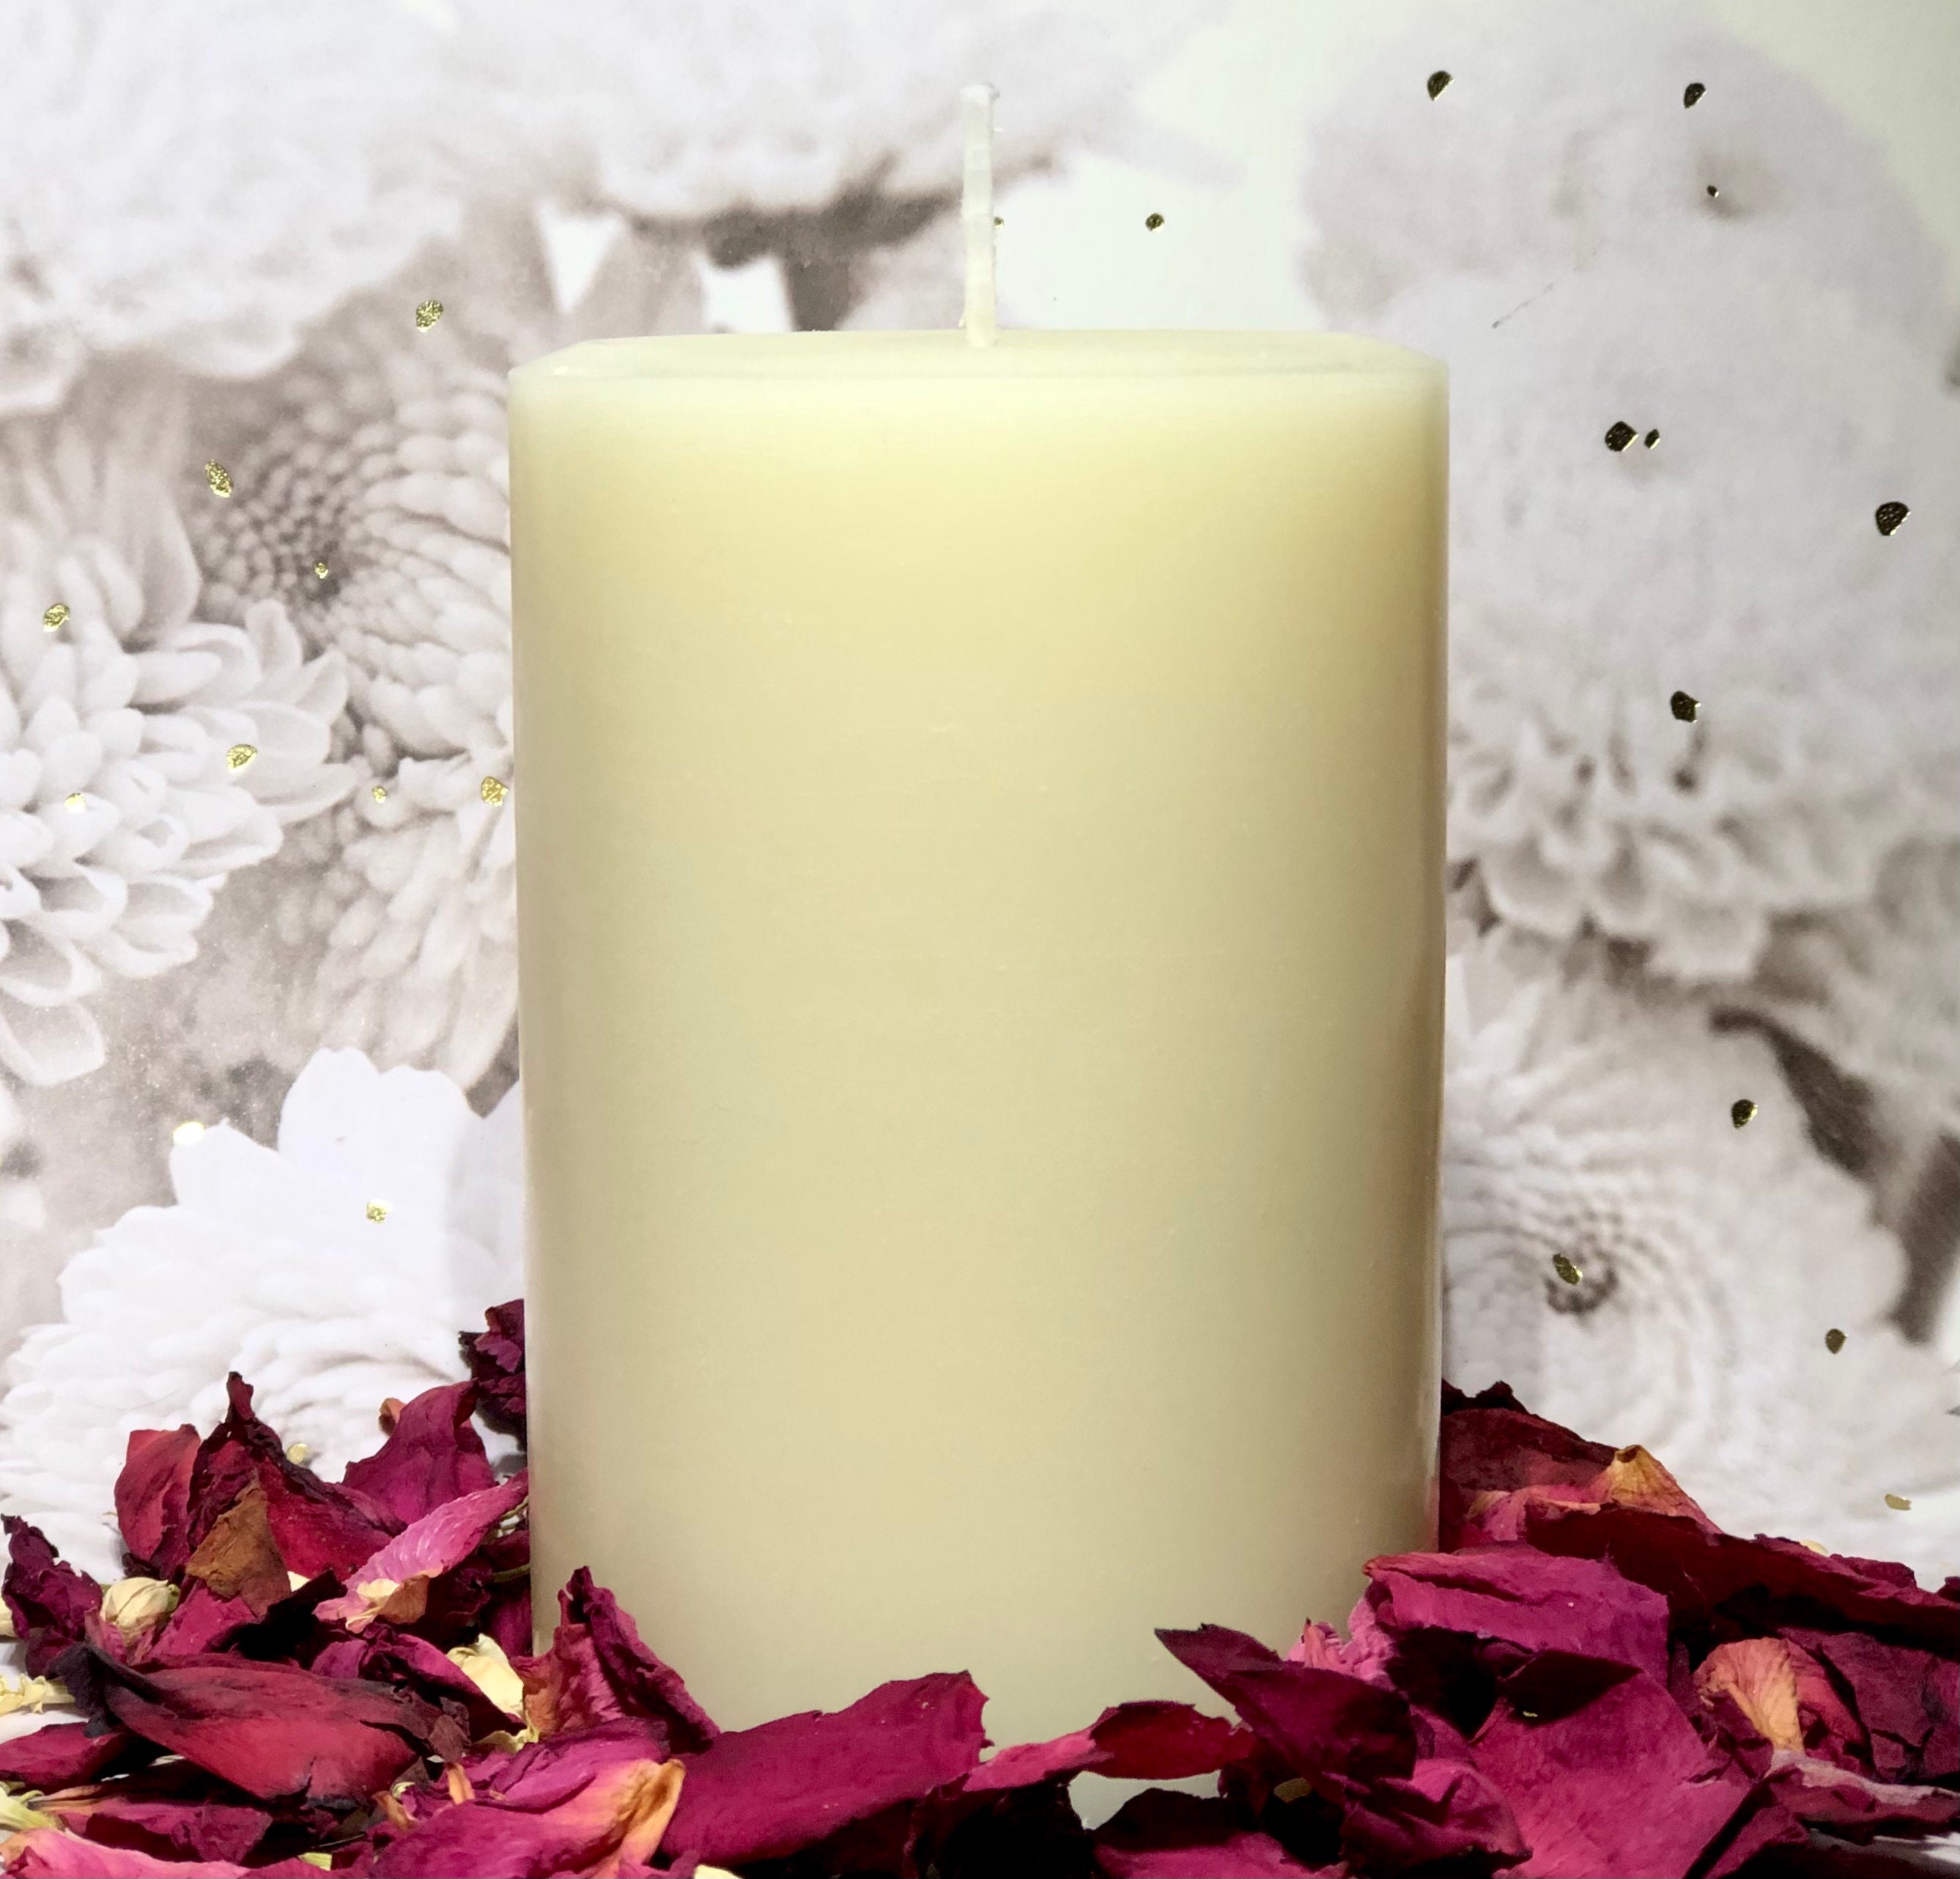 Beginners Guide To Making Paraffin Wax Pillar Candles 